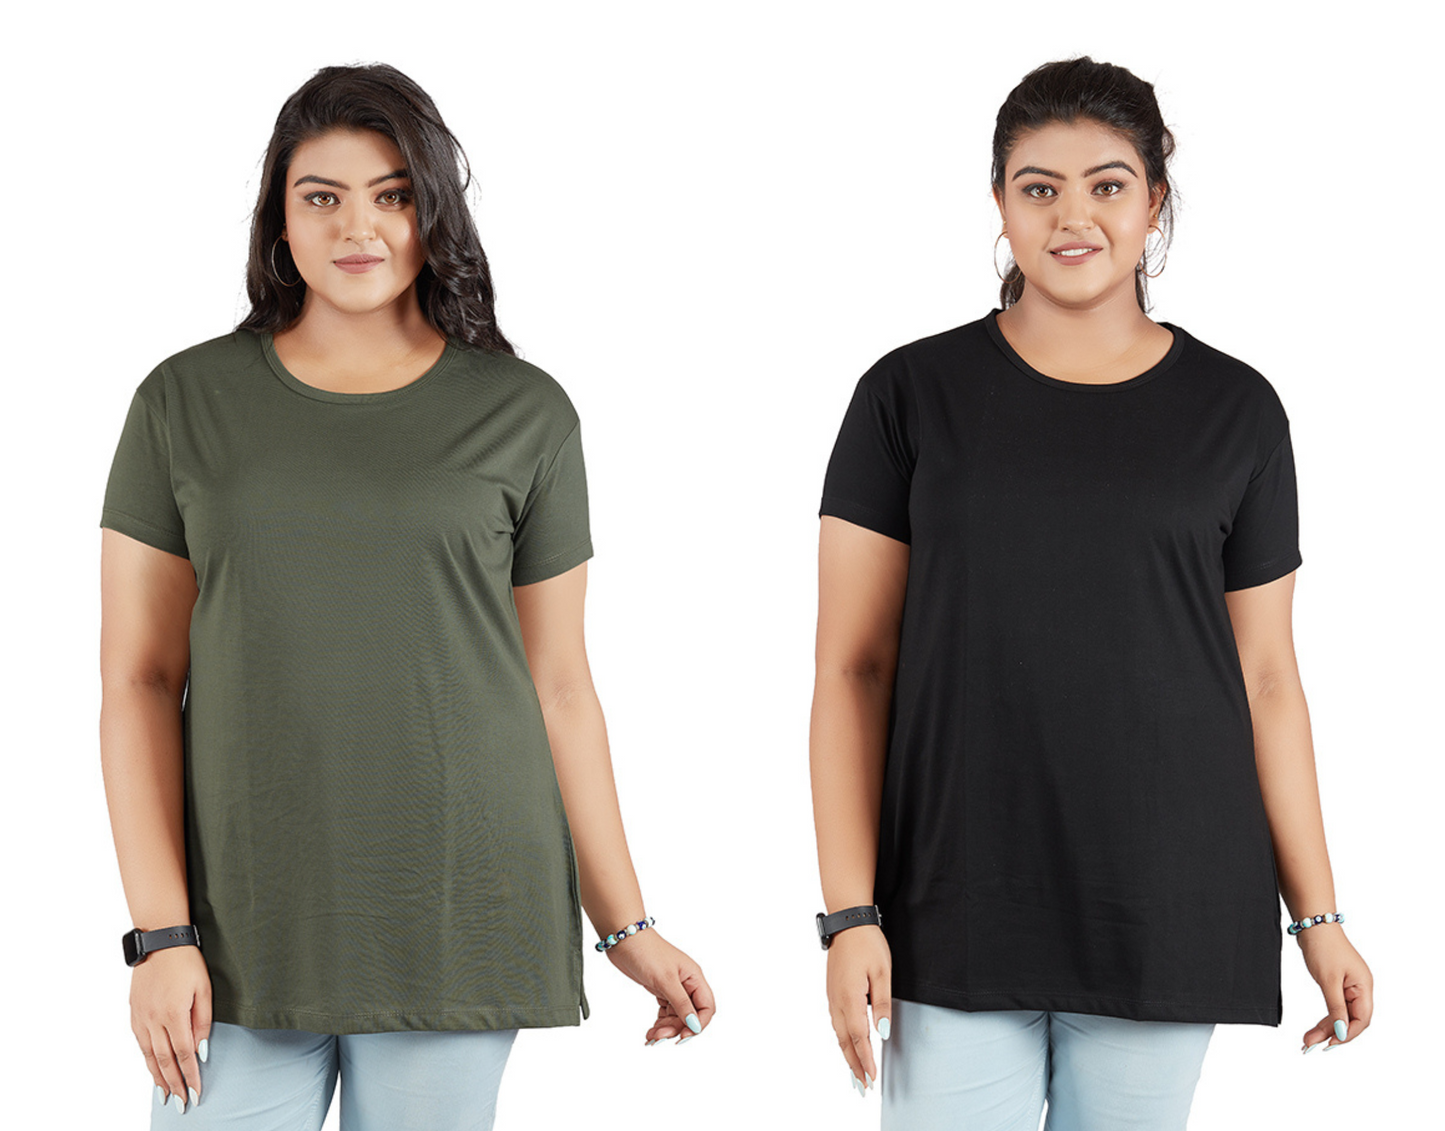 Comfortable Plus Size Plain Cotton Long T-Shirts For Women (Pack Of 2) Online In India